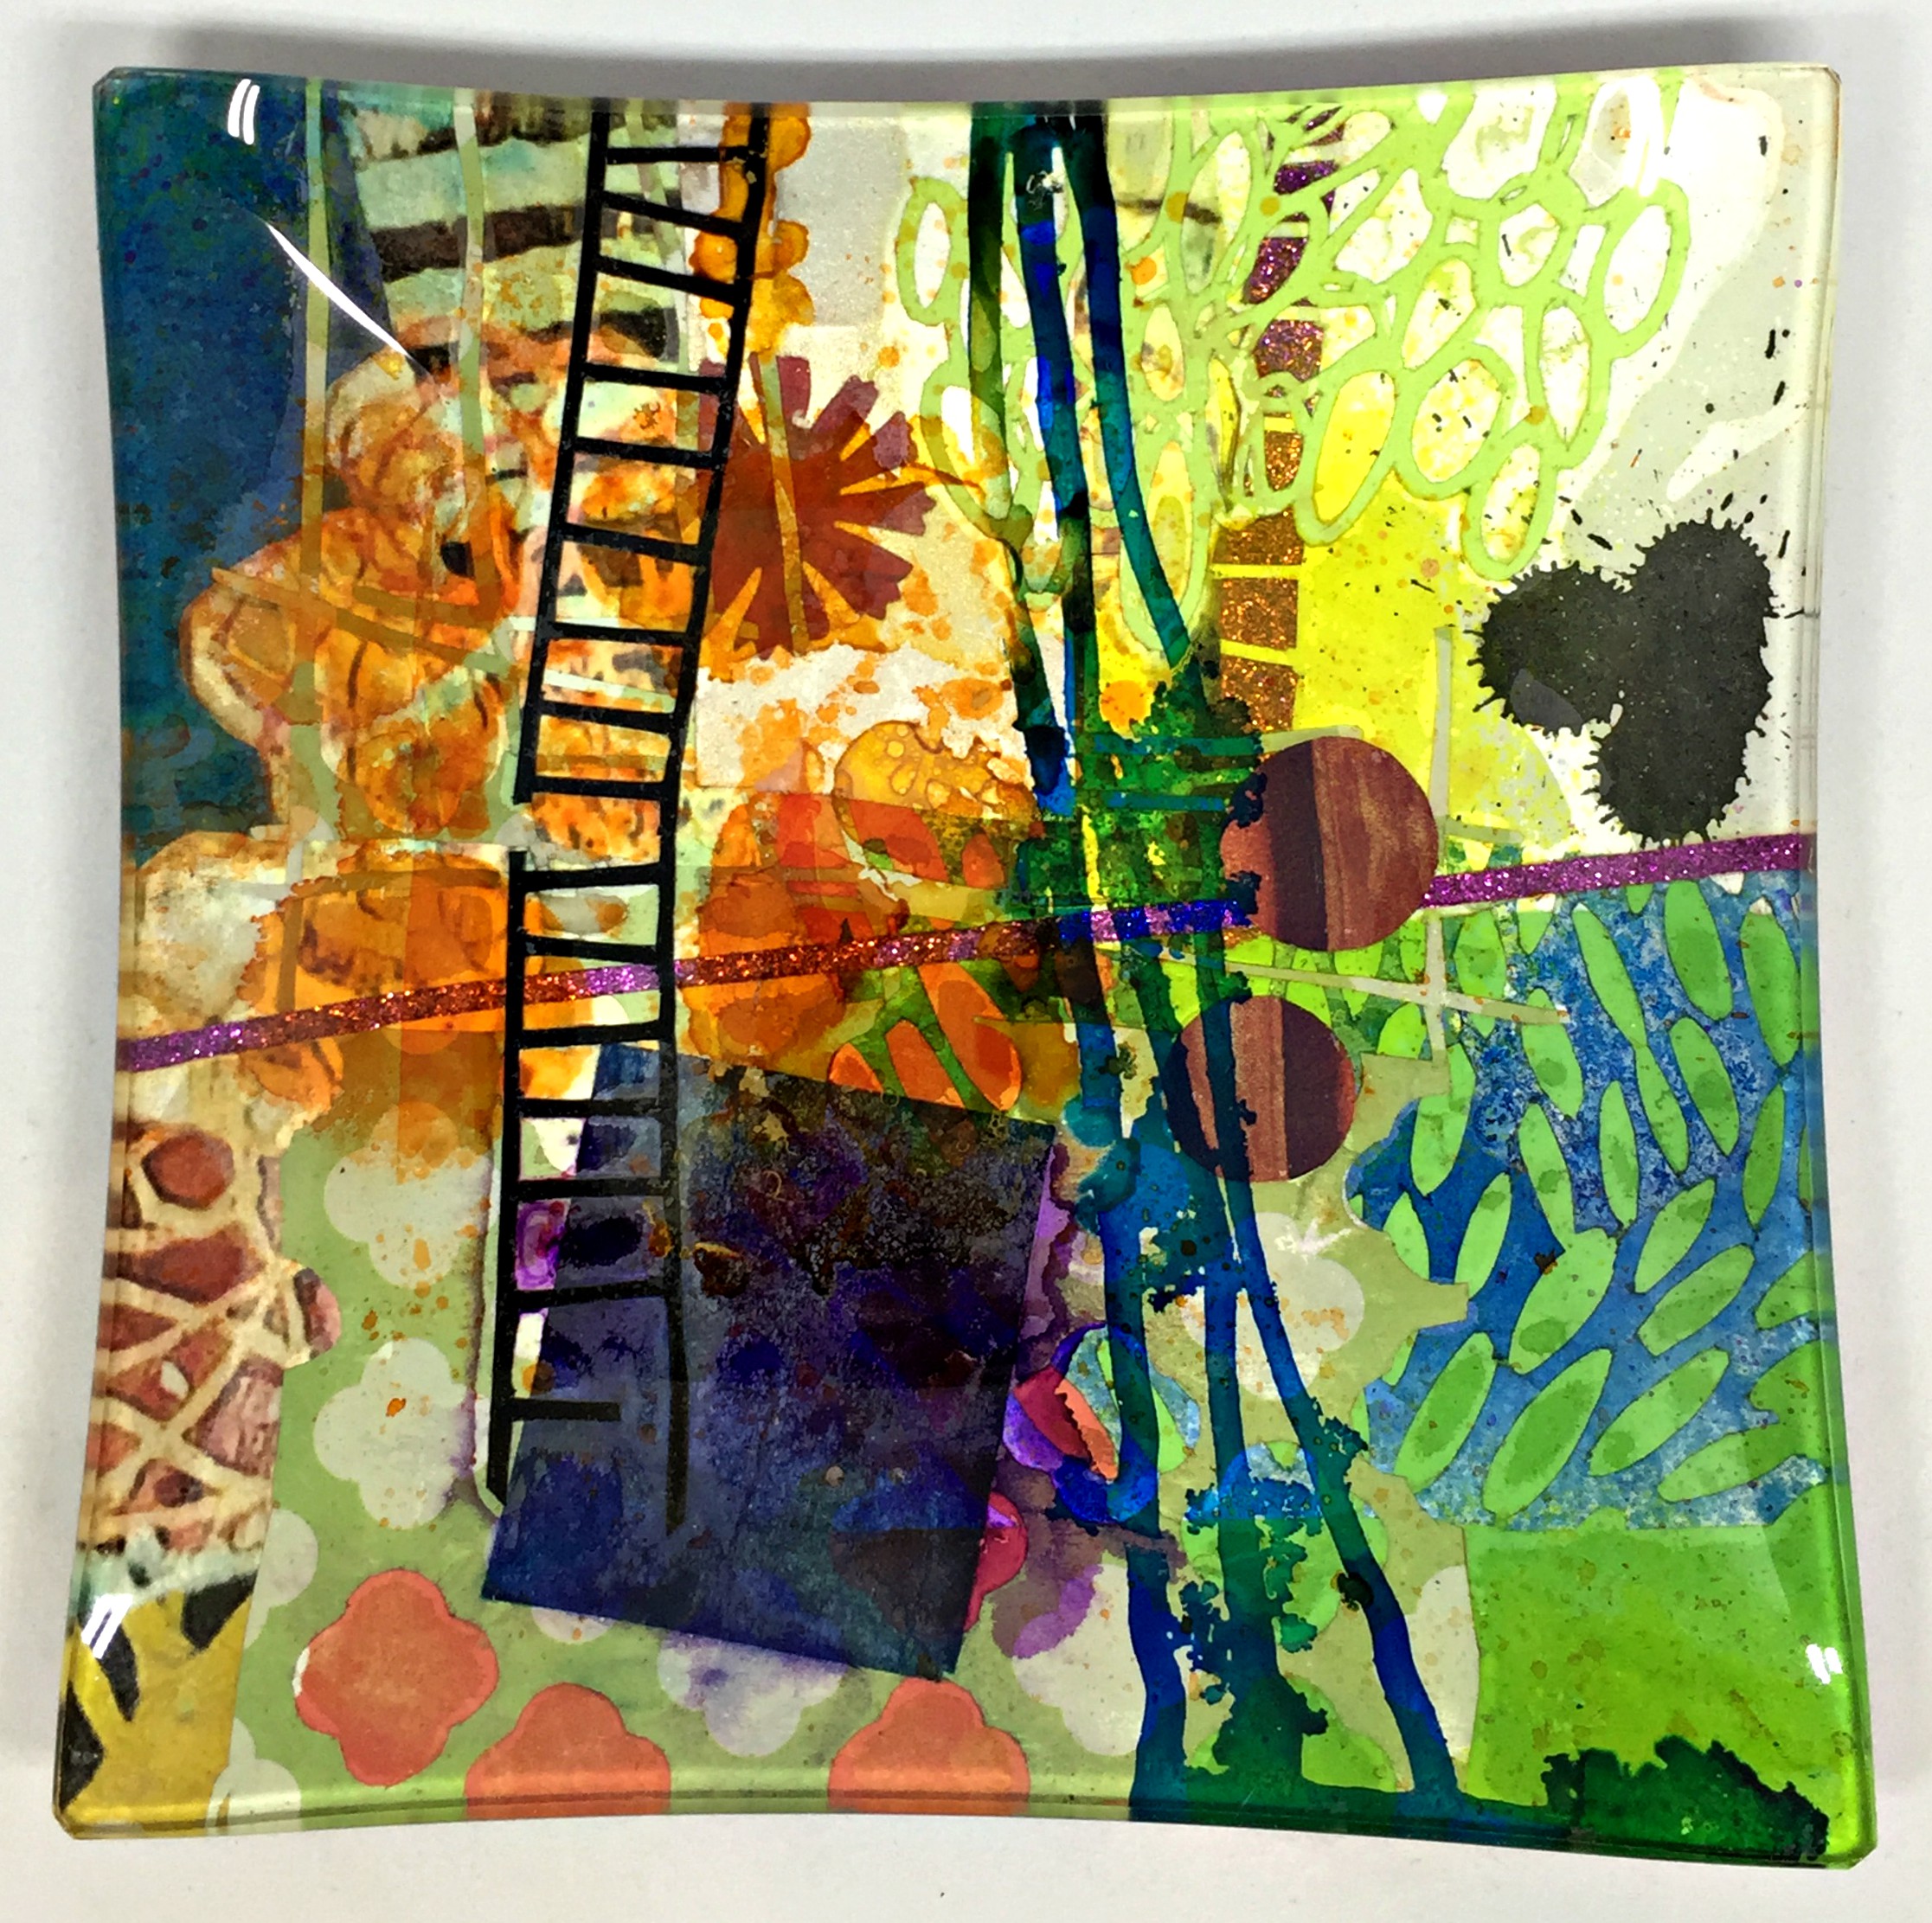 One of a kind 5" square plate by Julie Bell | Effusion Art Gallery + Cast Glass Studio